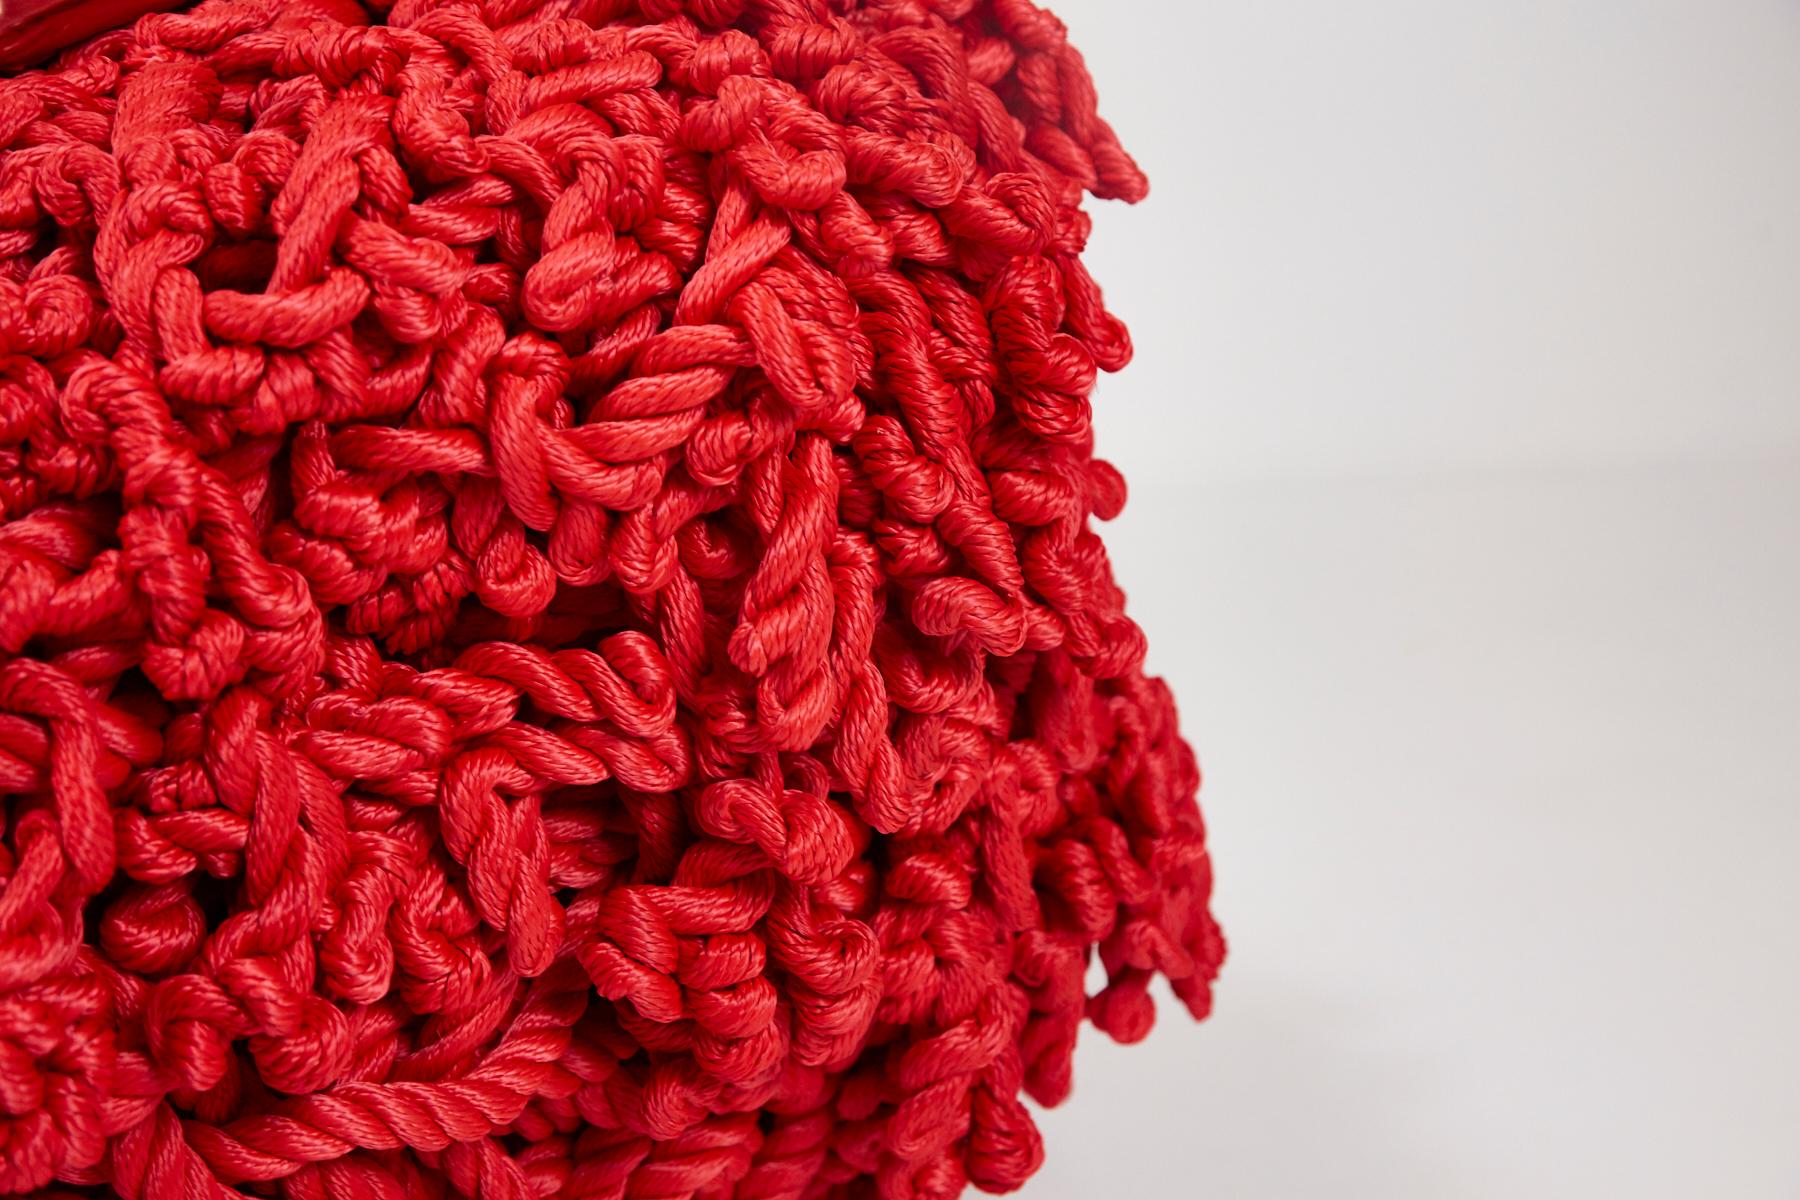 Meltdown Chair Pp Rope Red by Tom Price, 2017 7